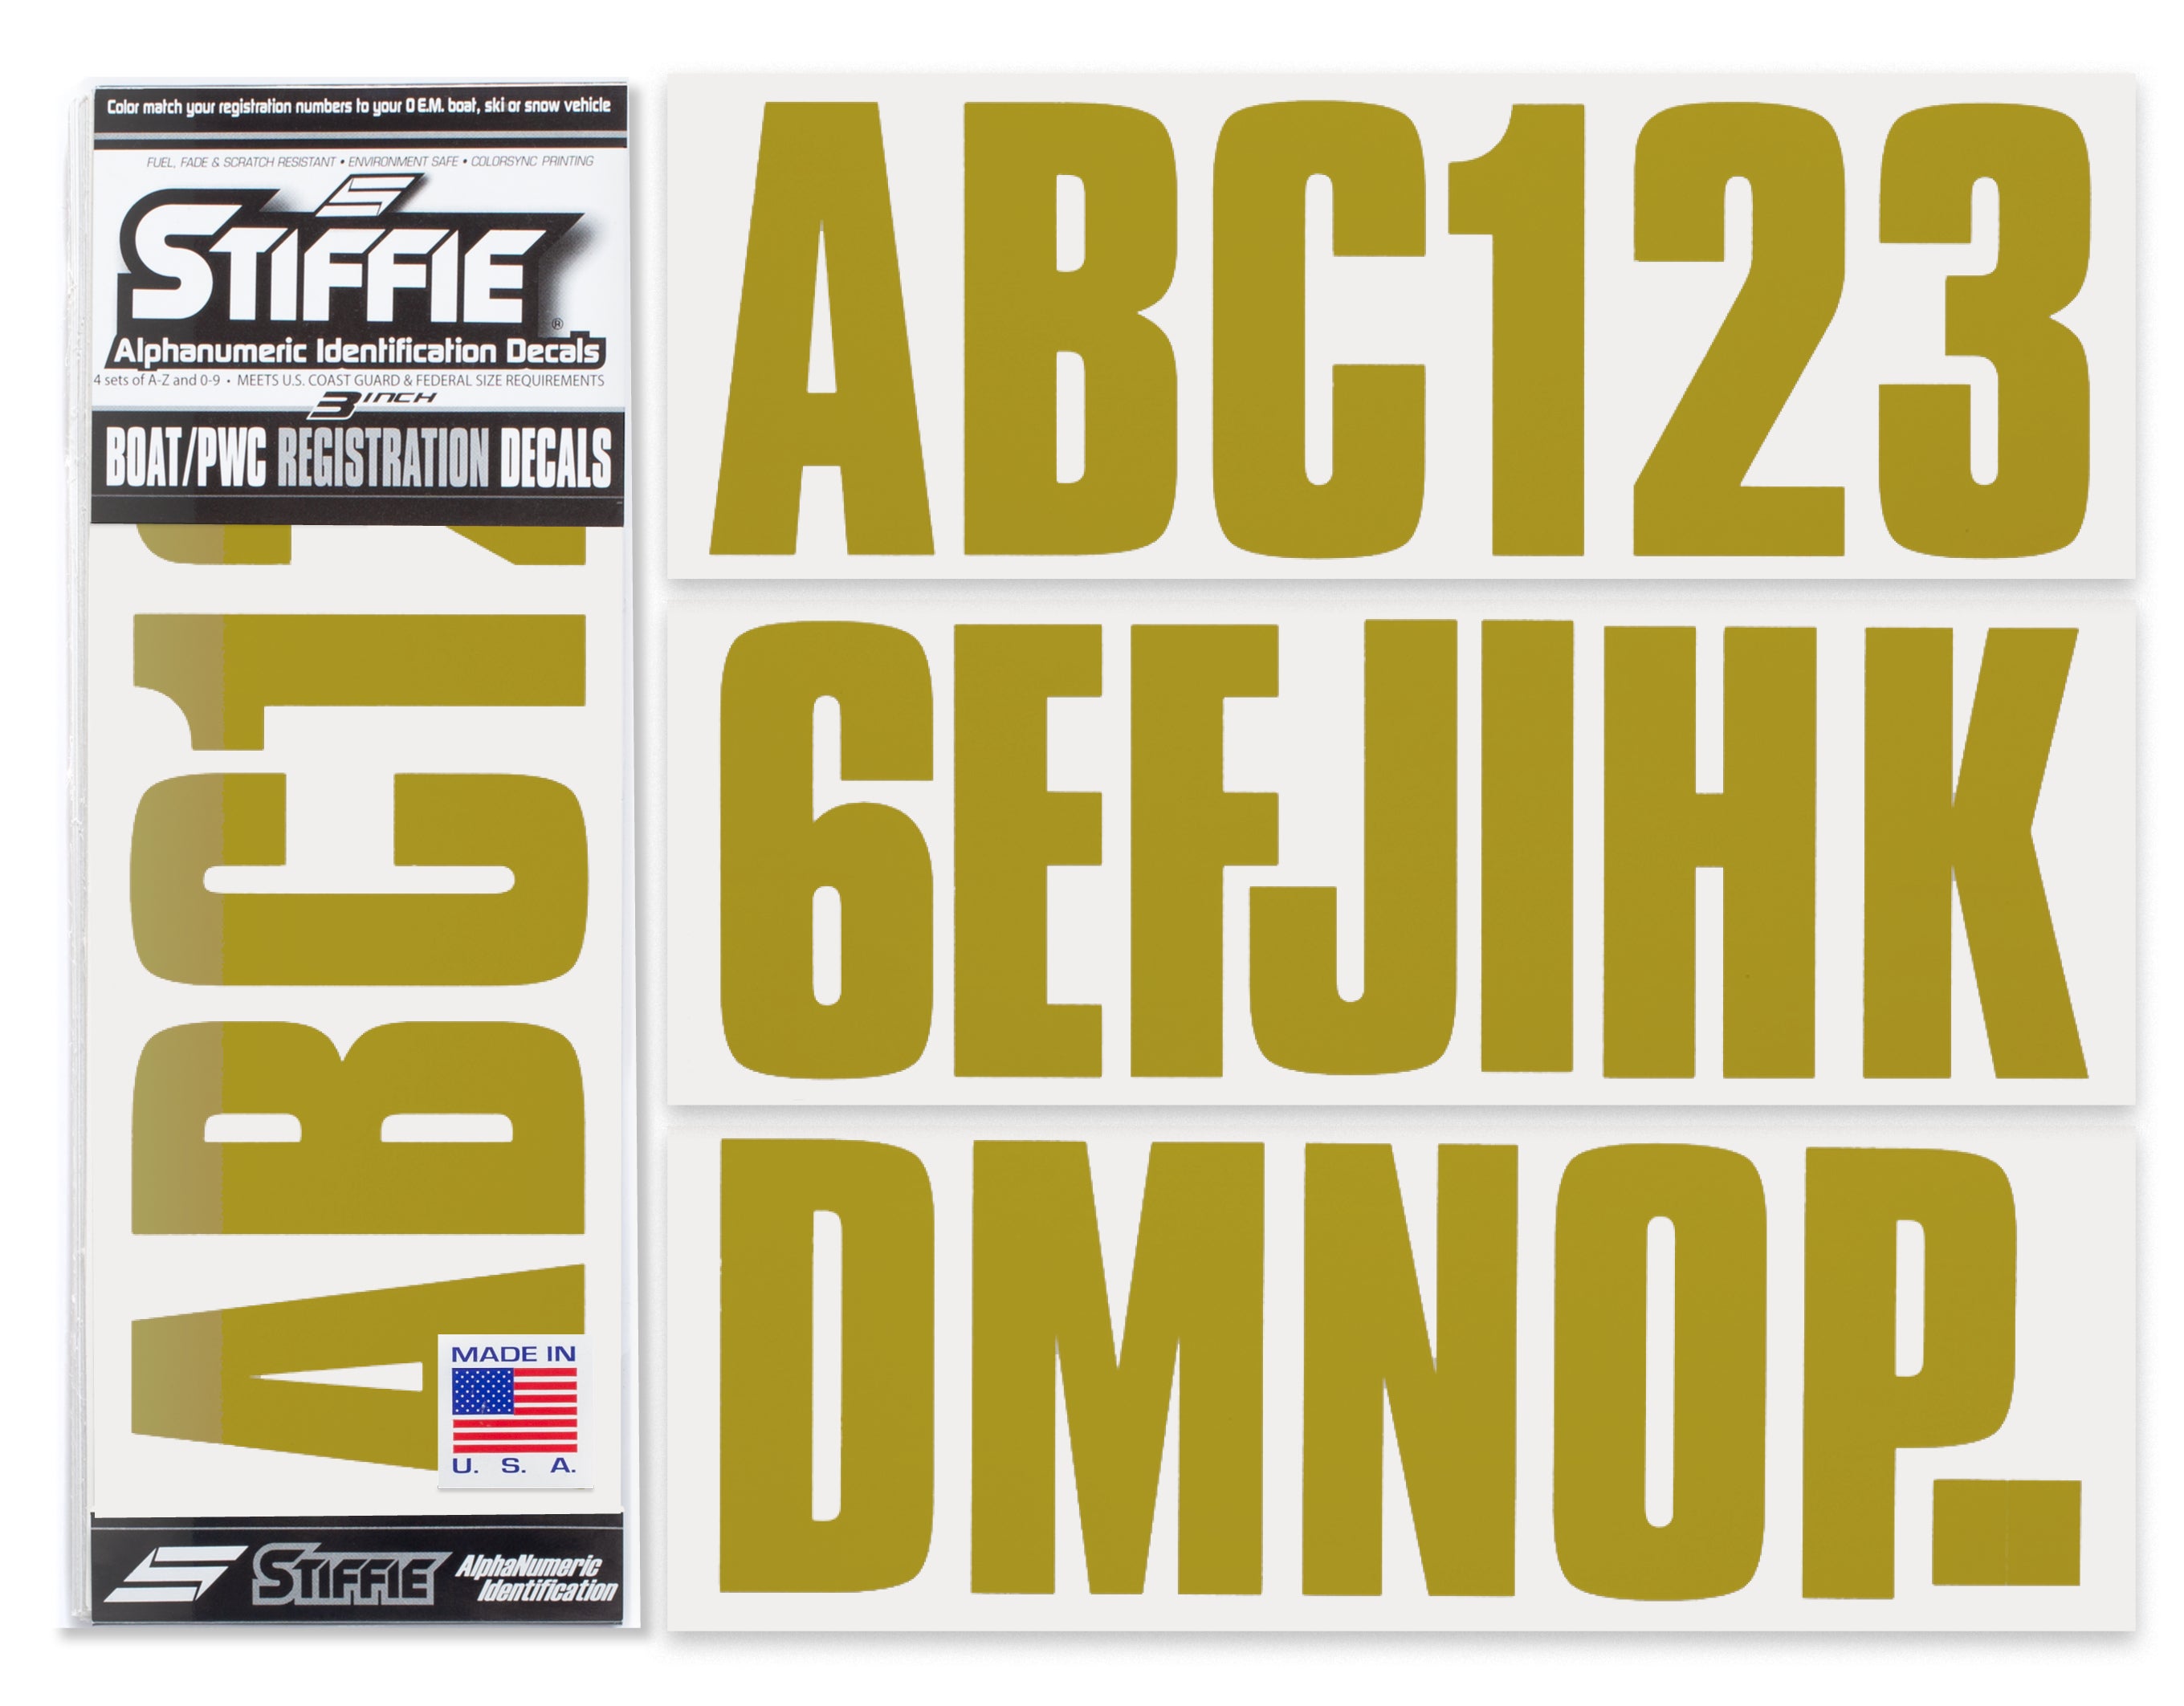 STIFFIE Uniline Metallic Gold 3" ID Kit Alpha-Numeric Registration Identification Numbers Stickers Decals for Boats & Personal Watercraft